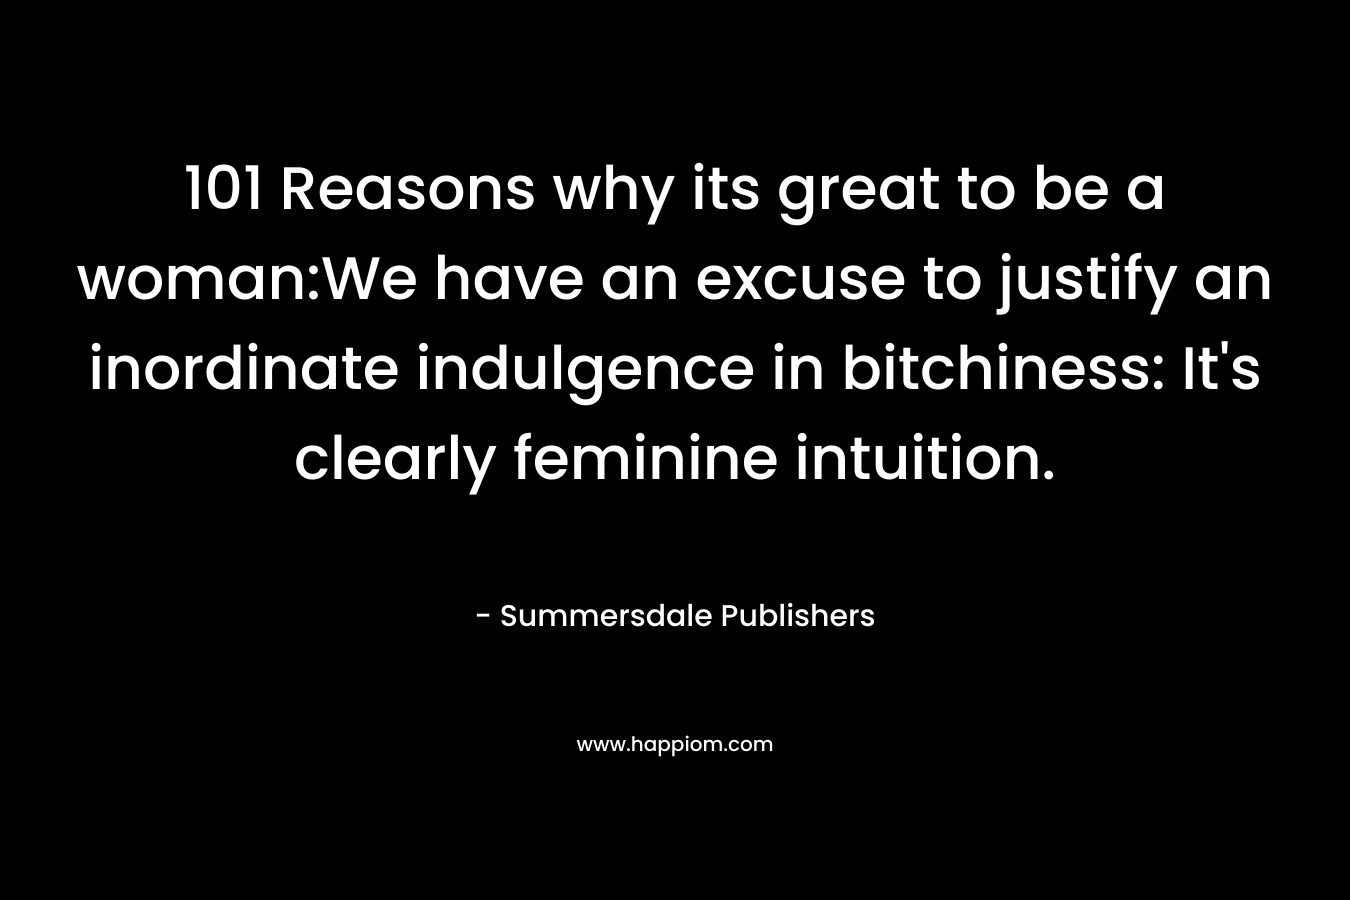 101 Reasons why its great to be a woman:We have an excuse to justify an inordinate indulgence in bitchiness: It’s clearly feminine intuition. – Summersdale Publishers